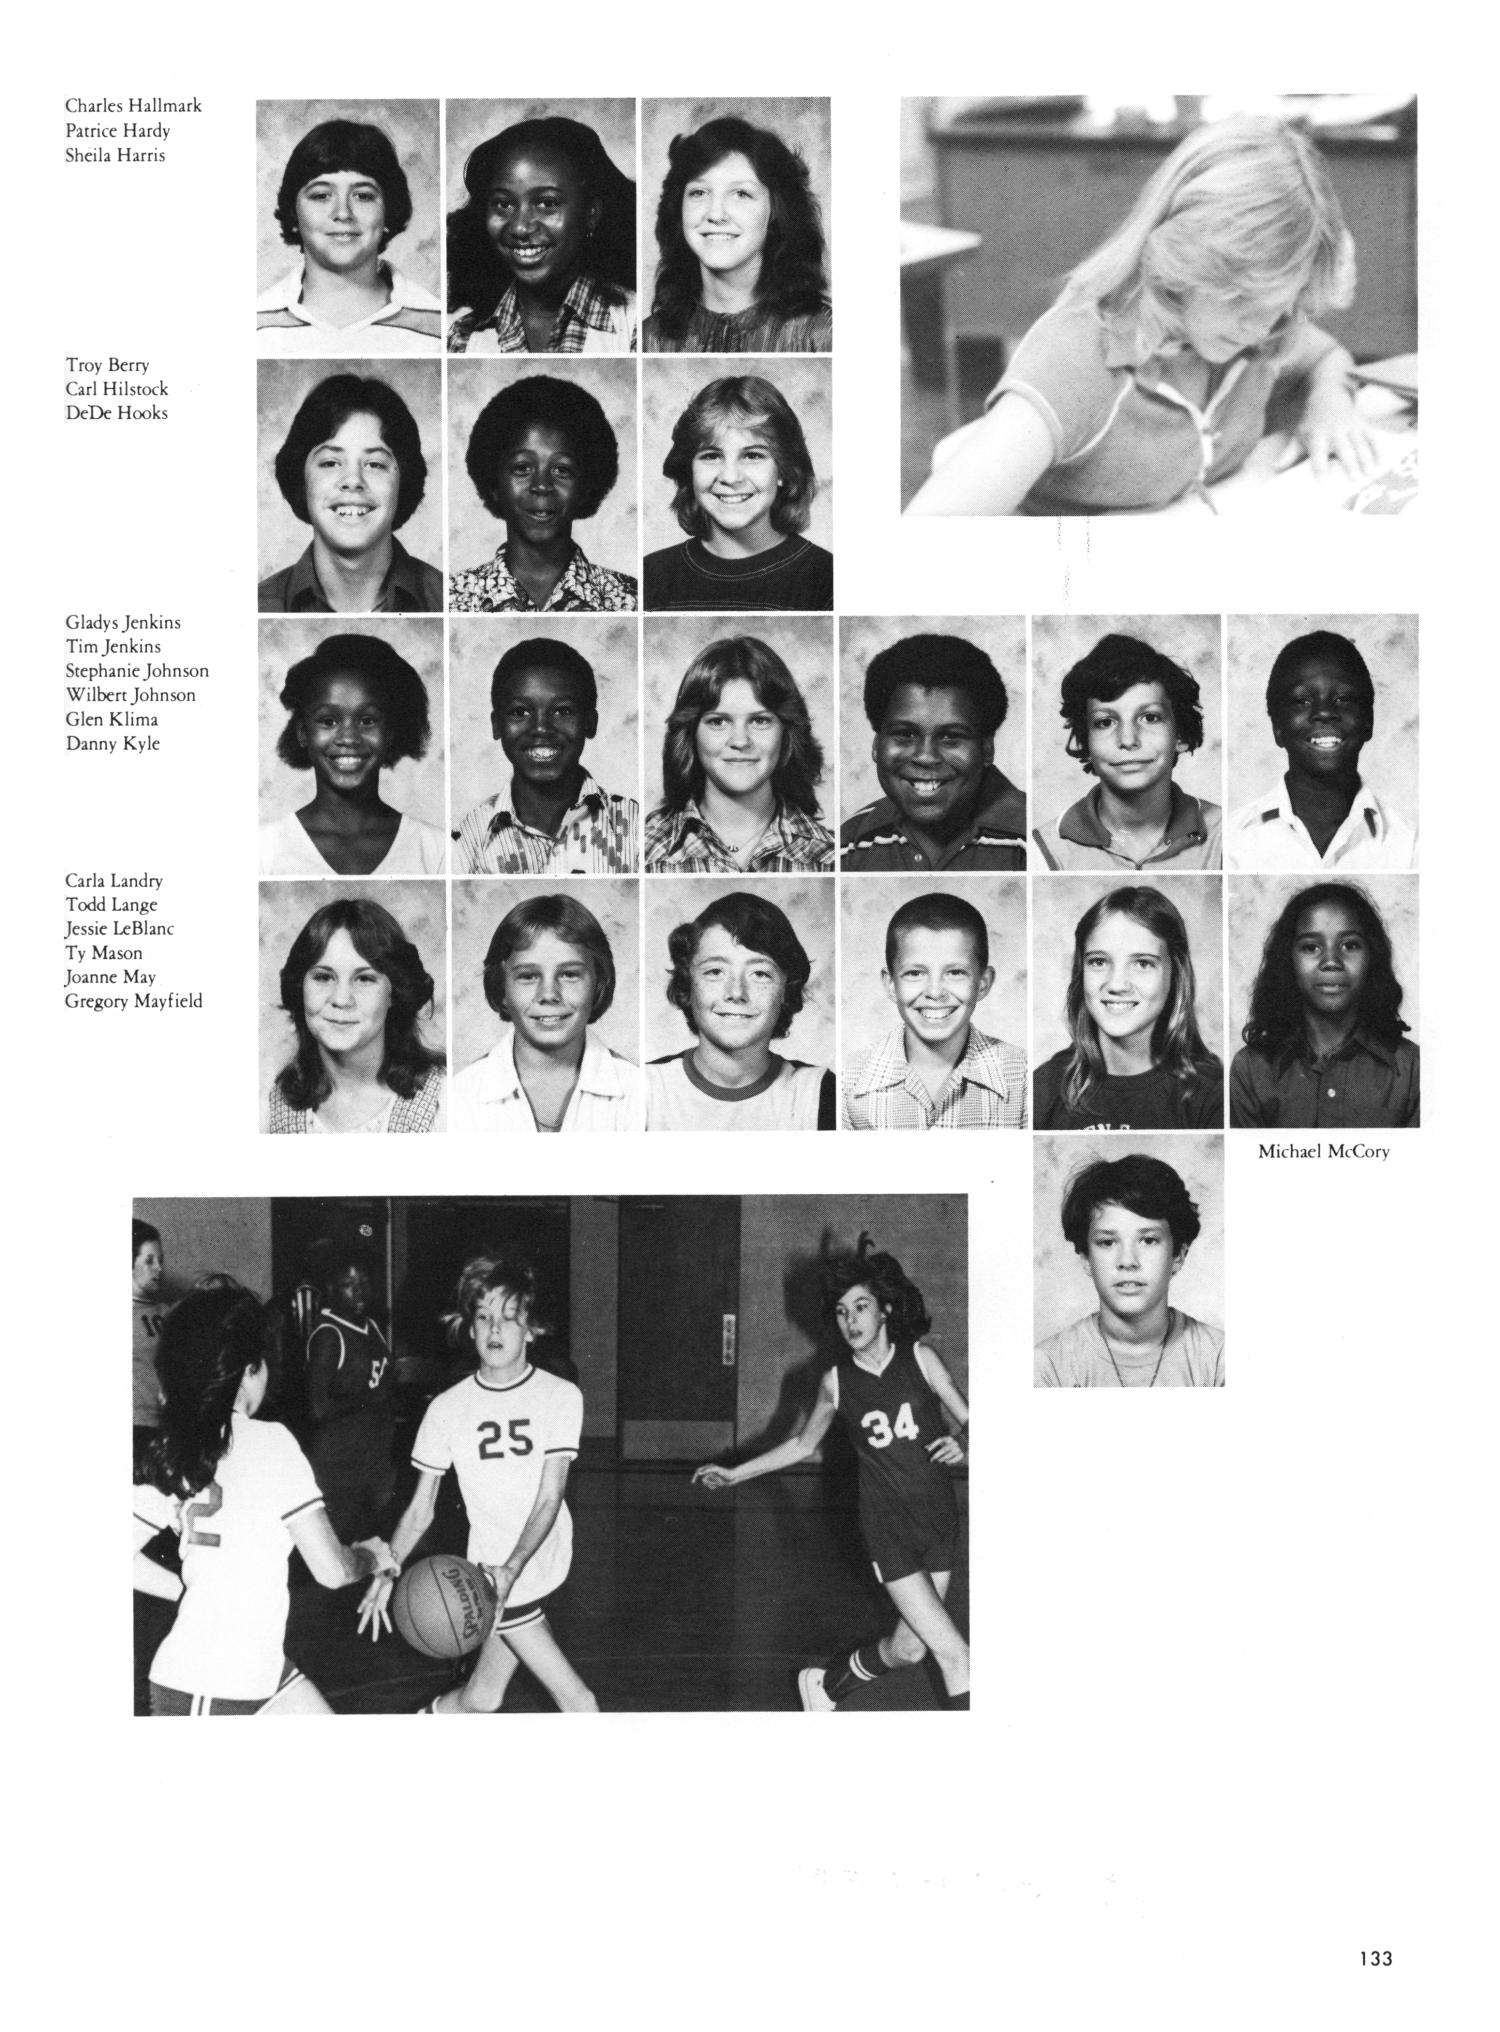 The Eagle, Yearbook of Stephen F. Austin High School, 1980 - Page 133 ...